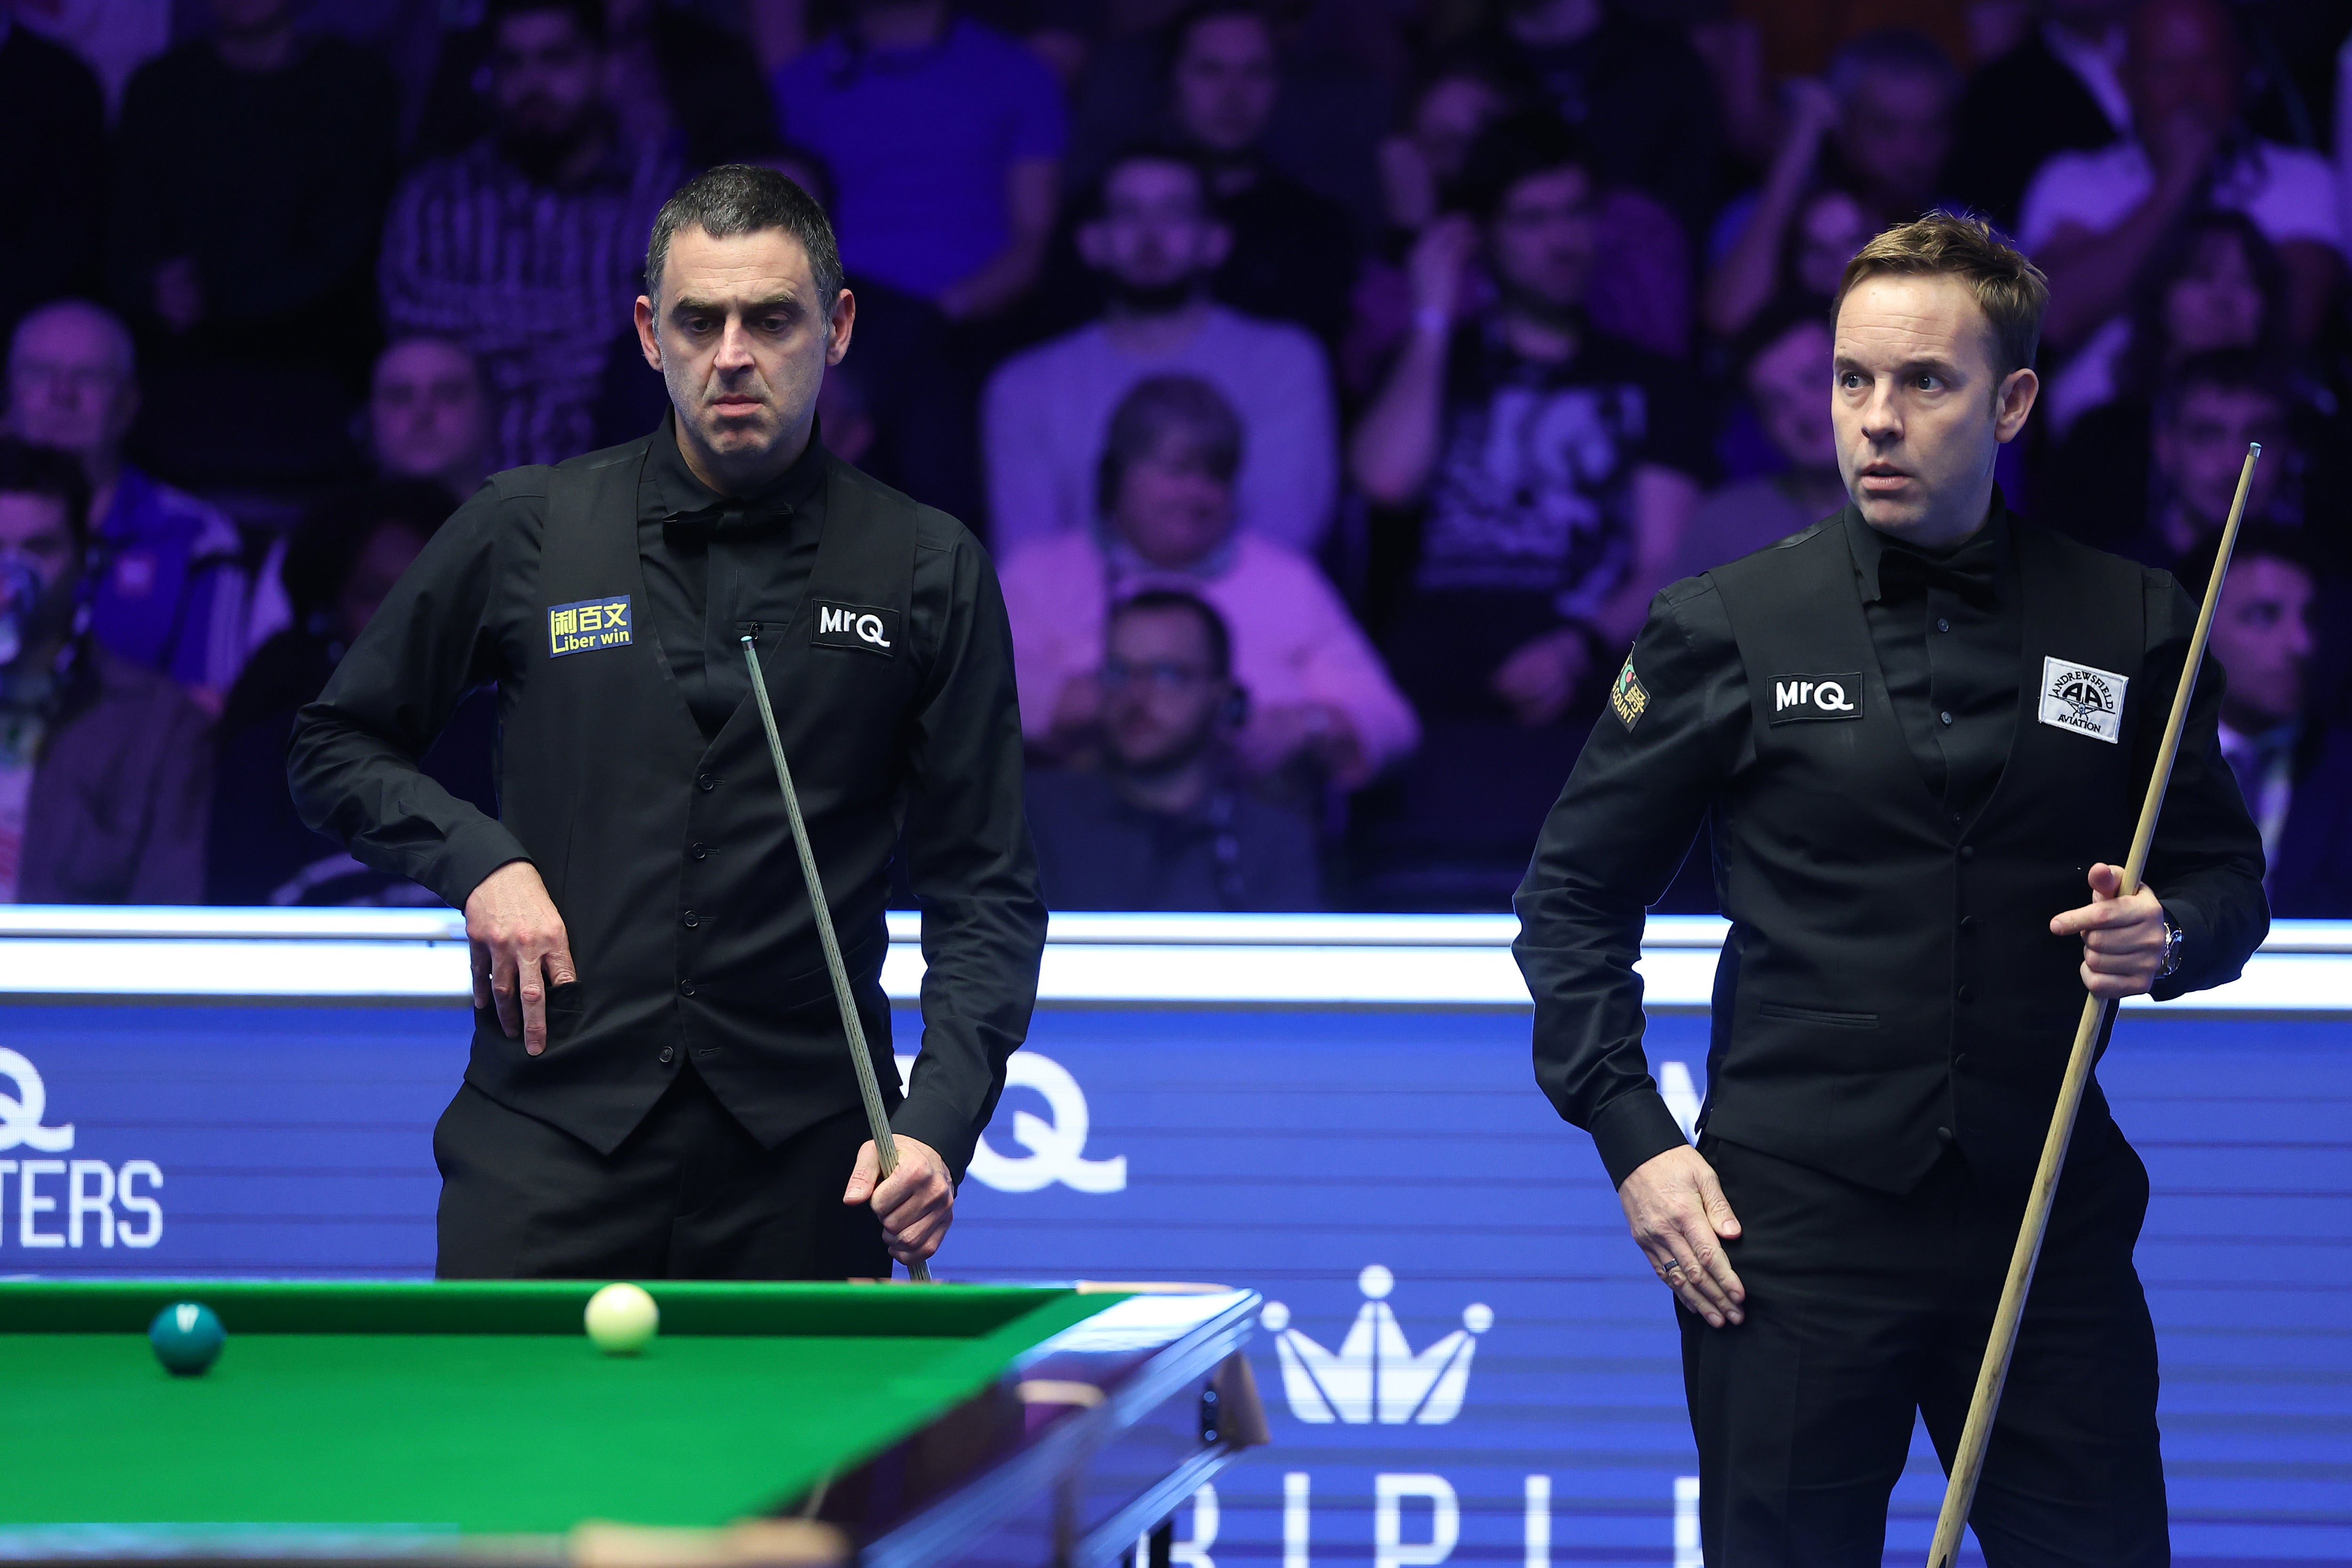 Ronnie O’Sullivan hammered Ali Carter at the Tour Championship